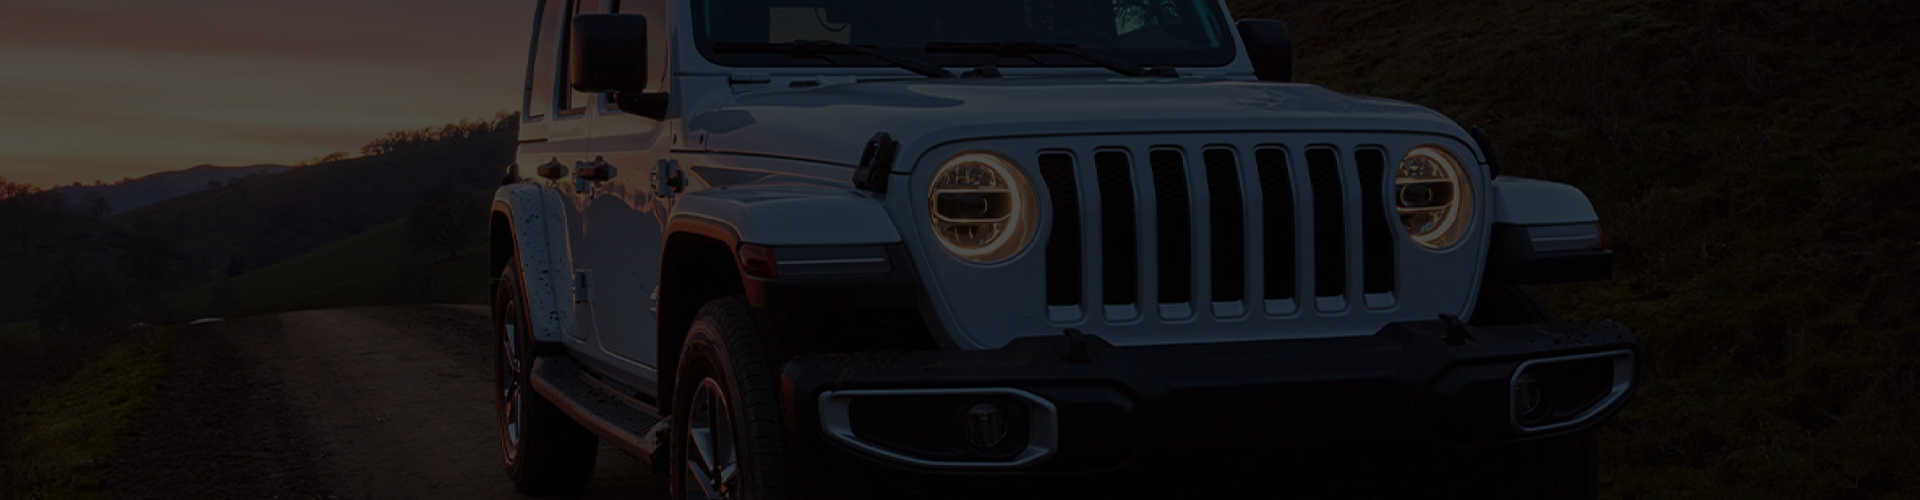 Moon township pa dealership Chrysler dodge jeep ram sales diehl of moon pennsylvania Diehl Automotive Chrysler specials dodge specials jeep specials ram specials lease discount family pricing drive forward